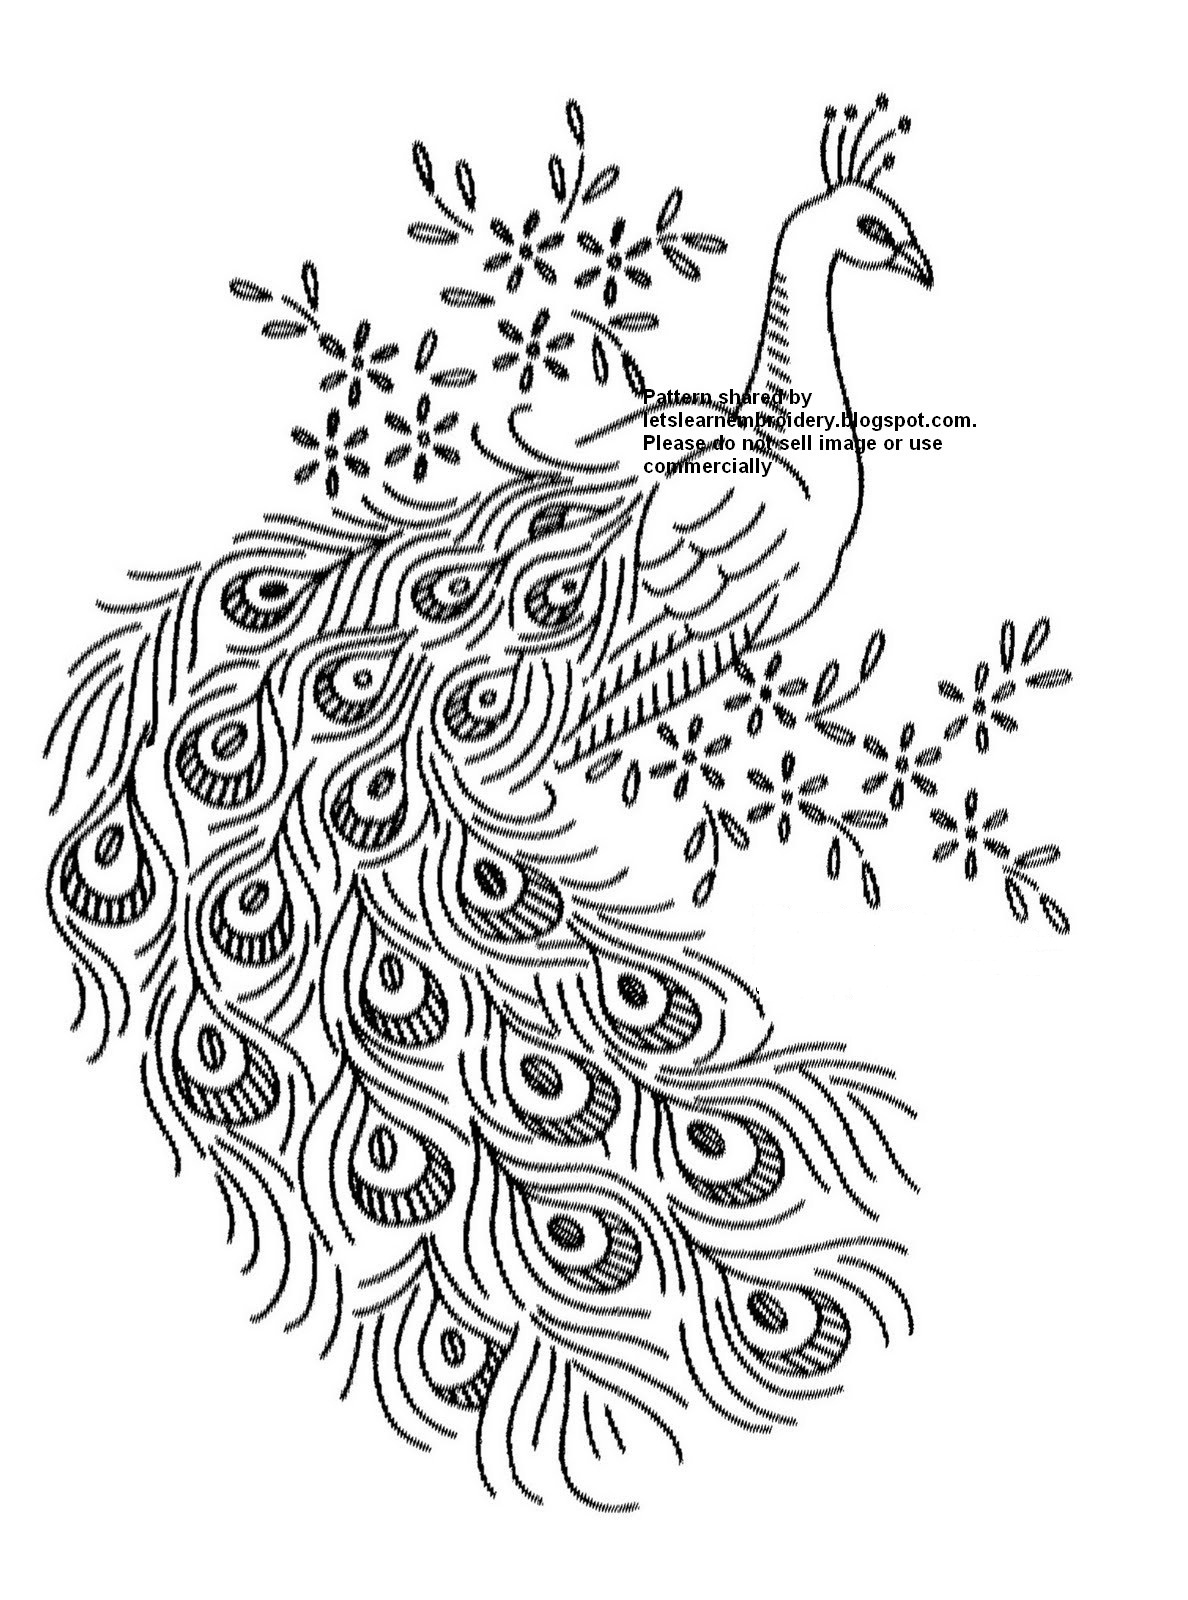 Download Let's learn embroidery: Free peacock pattern 1